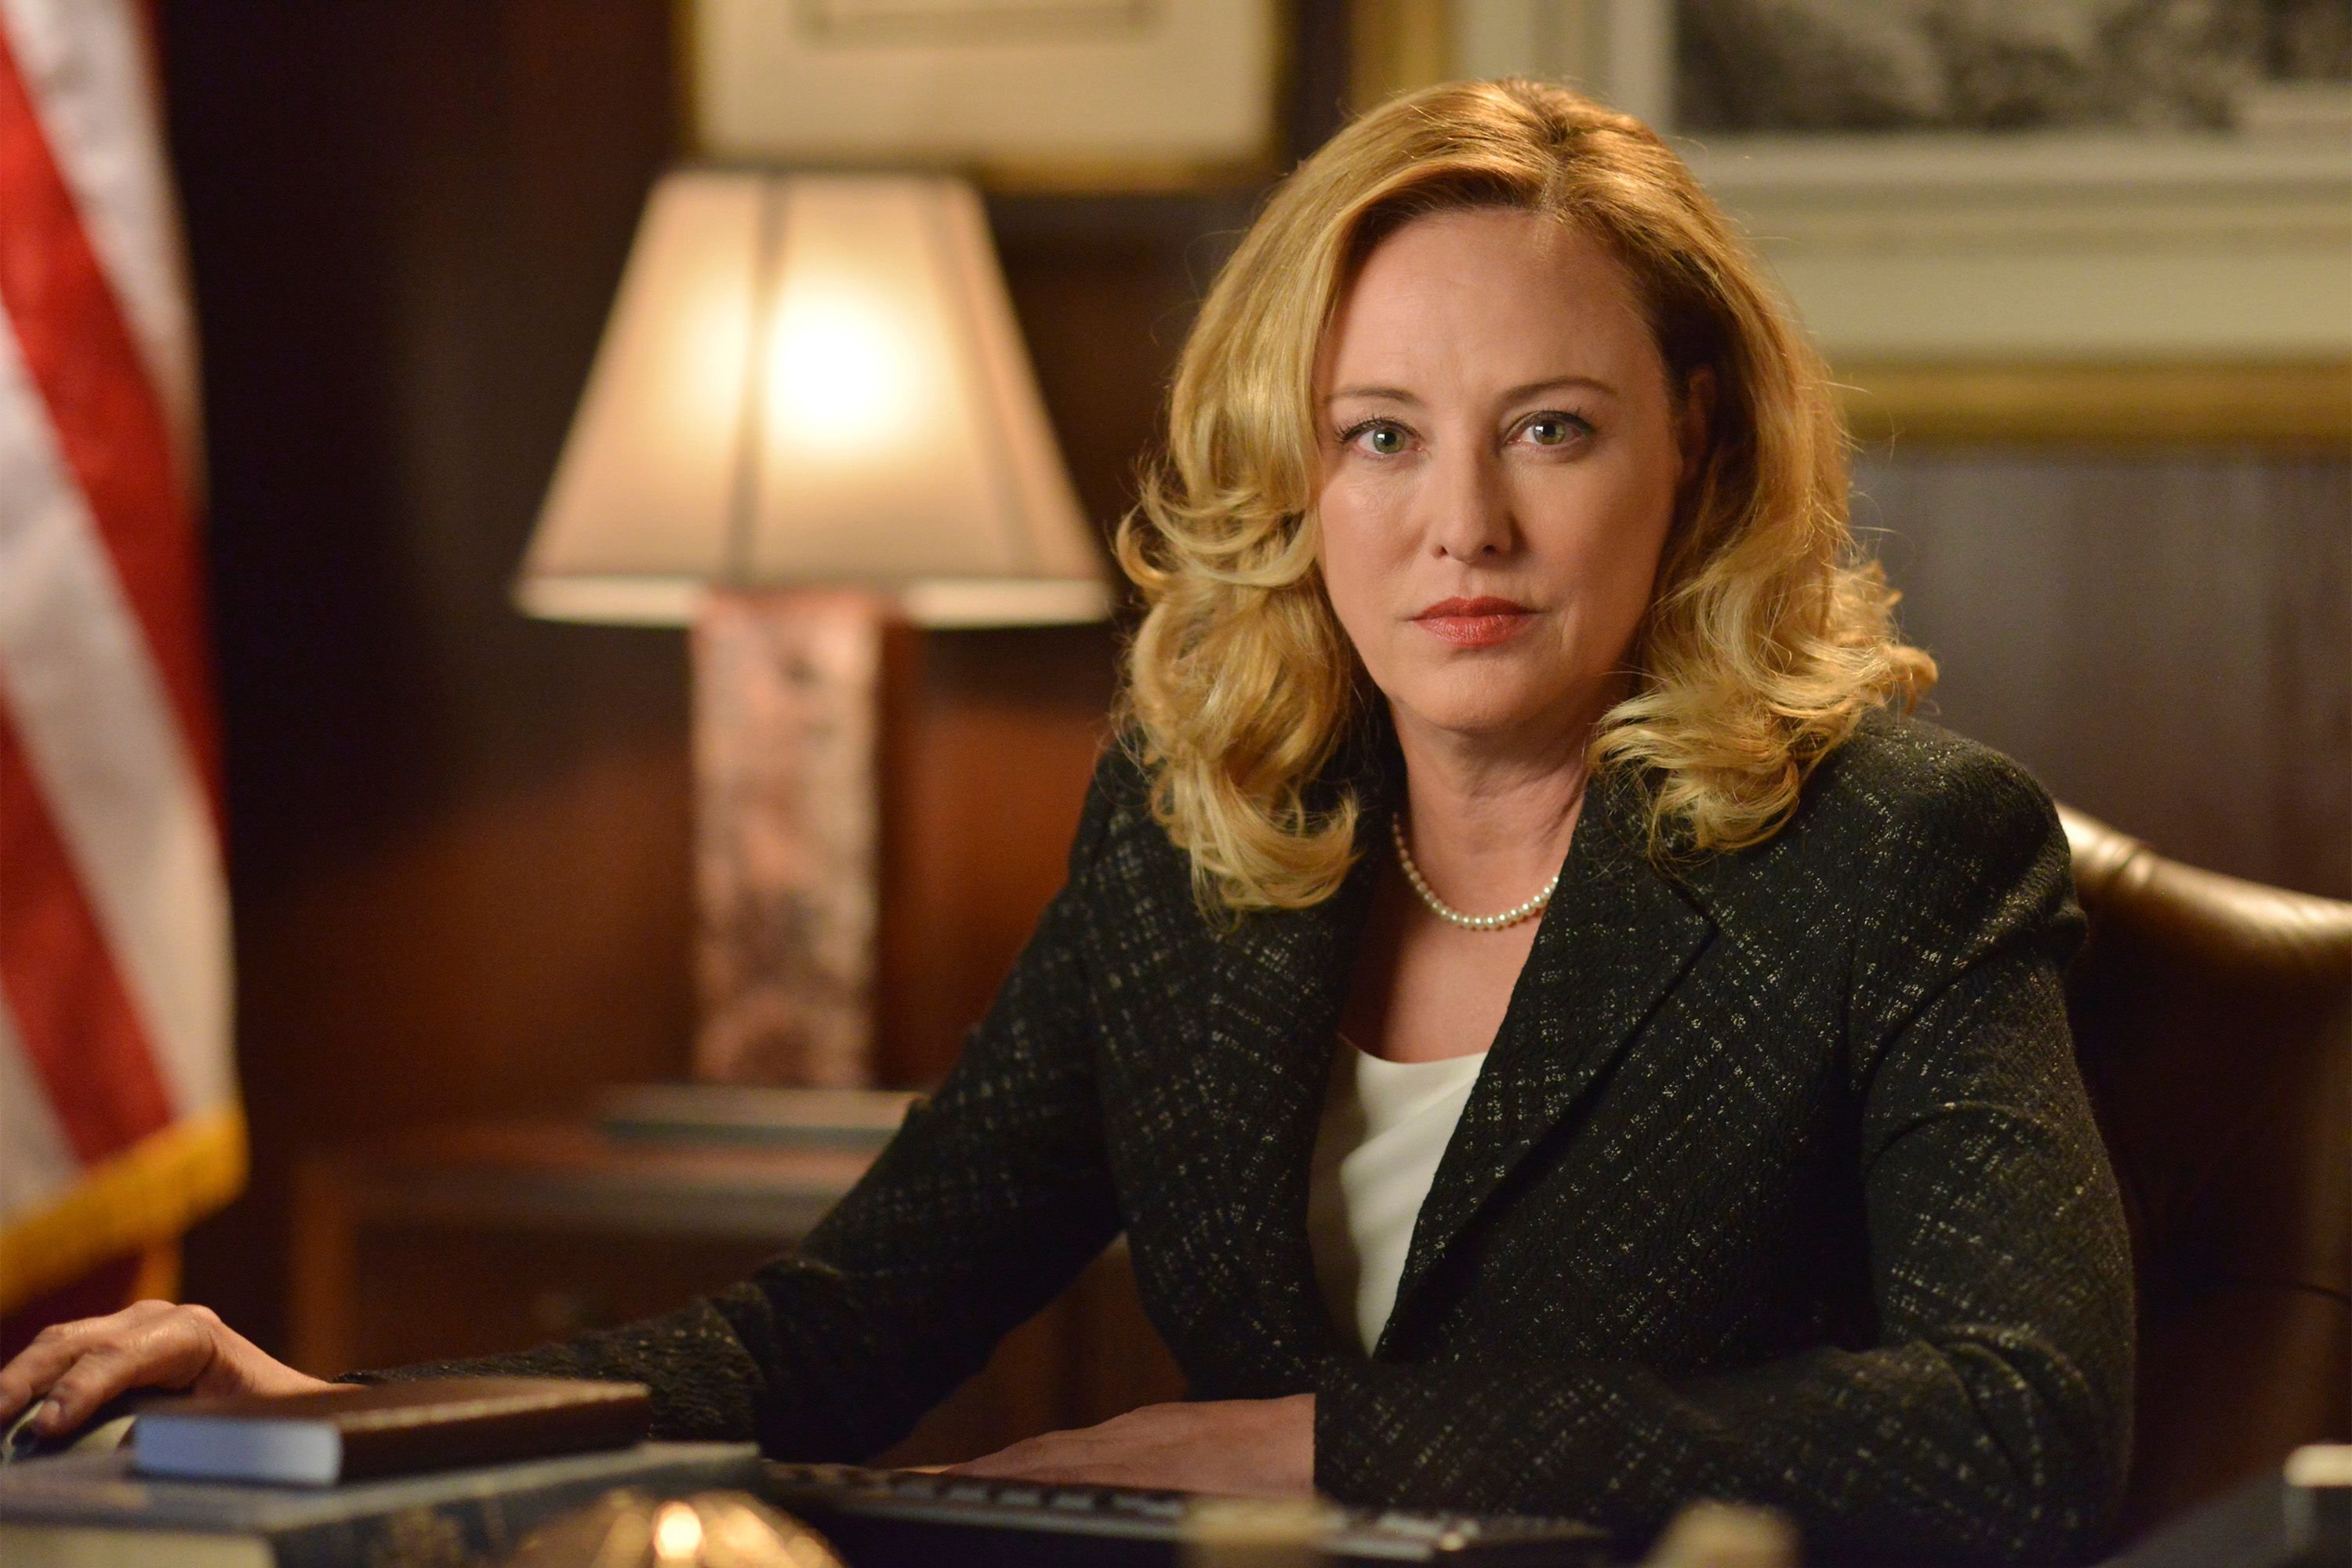 Virginia Madsen on the set of  "Designated Survivor" in 2015 | Source: Getty Images